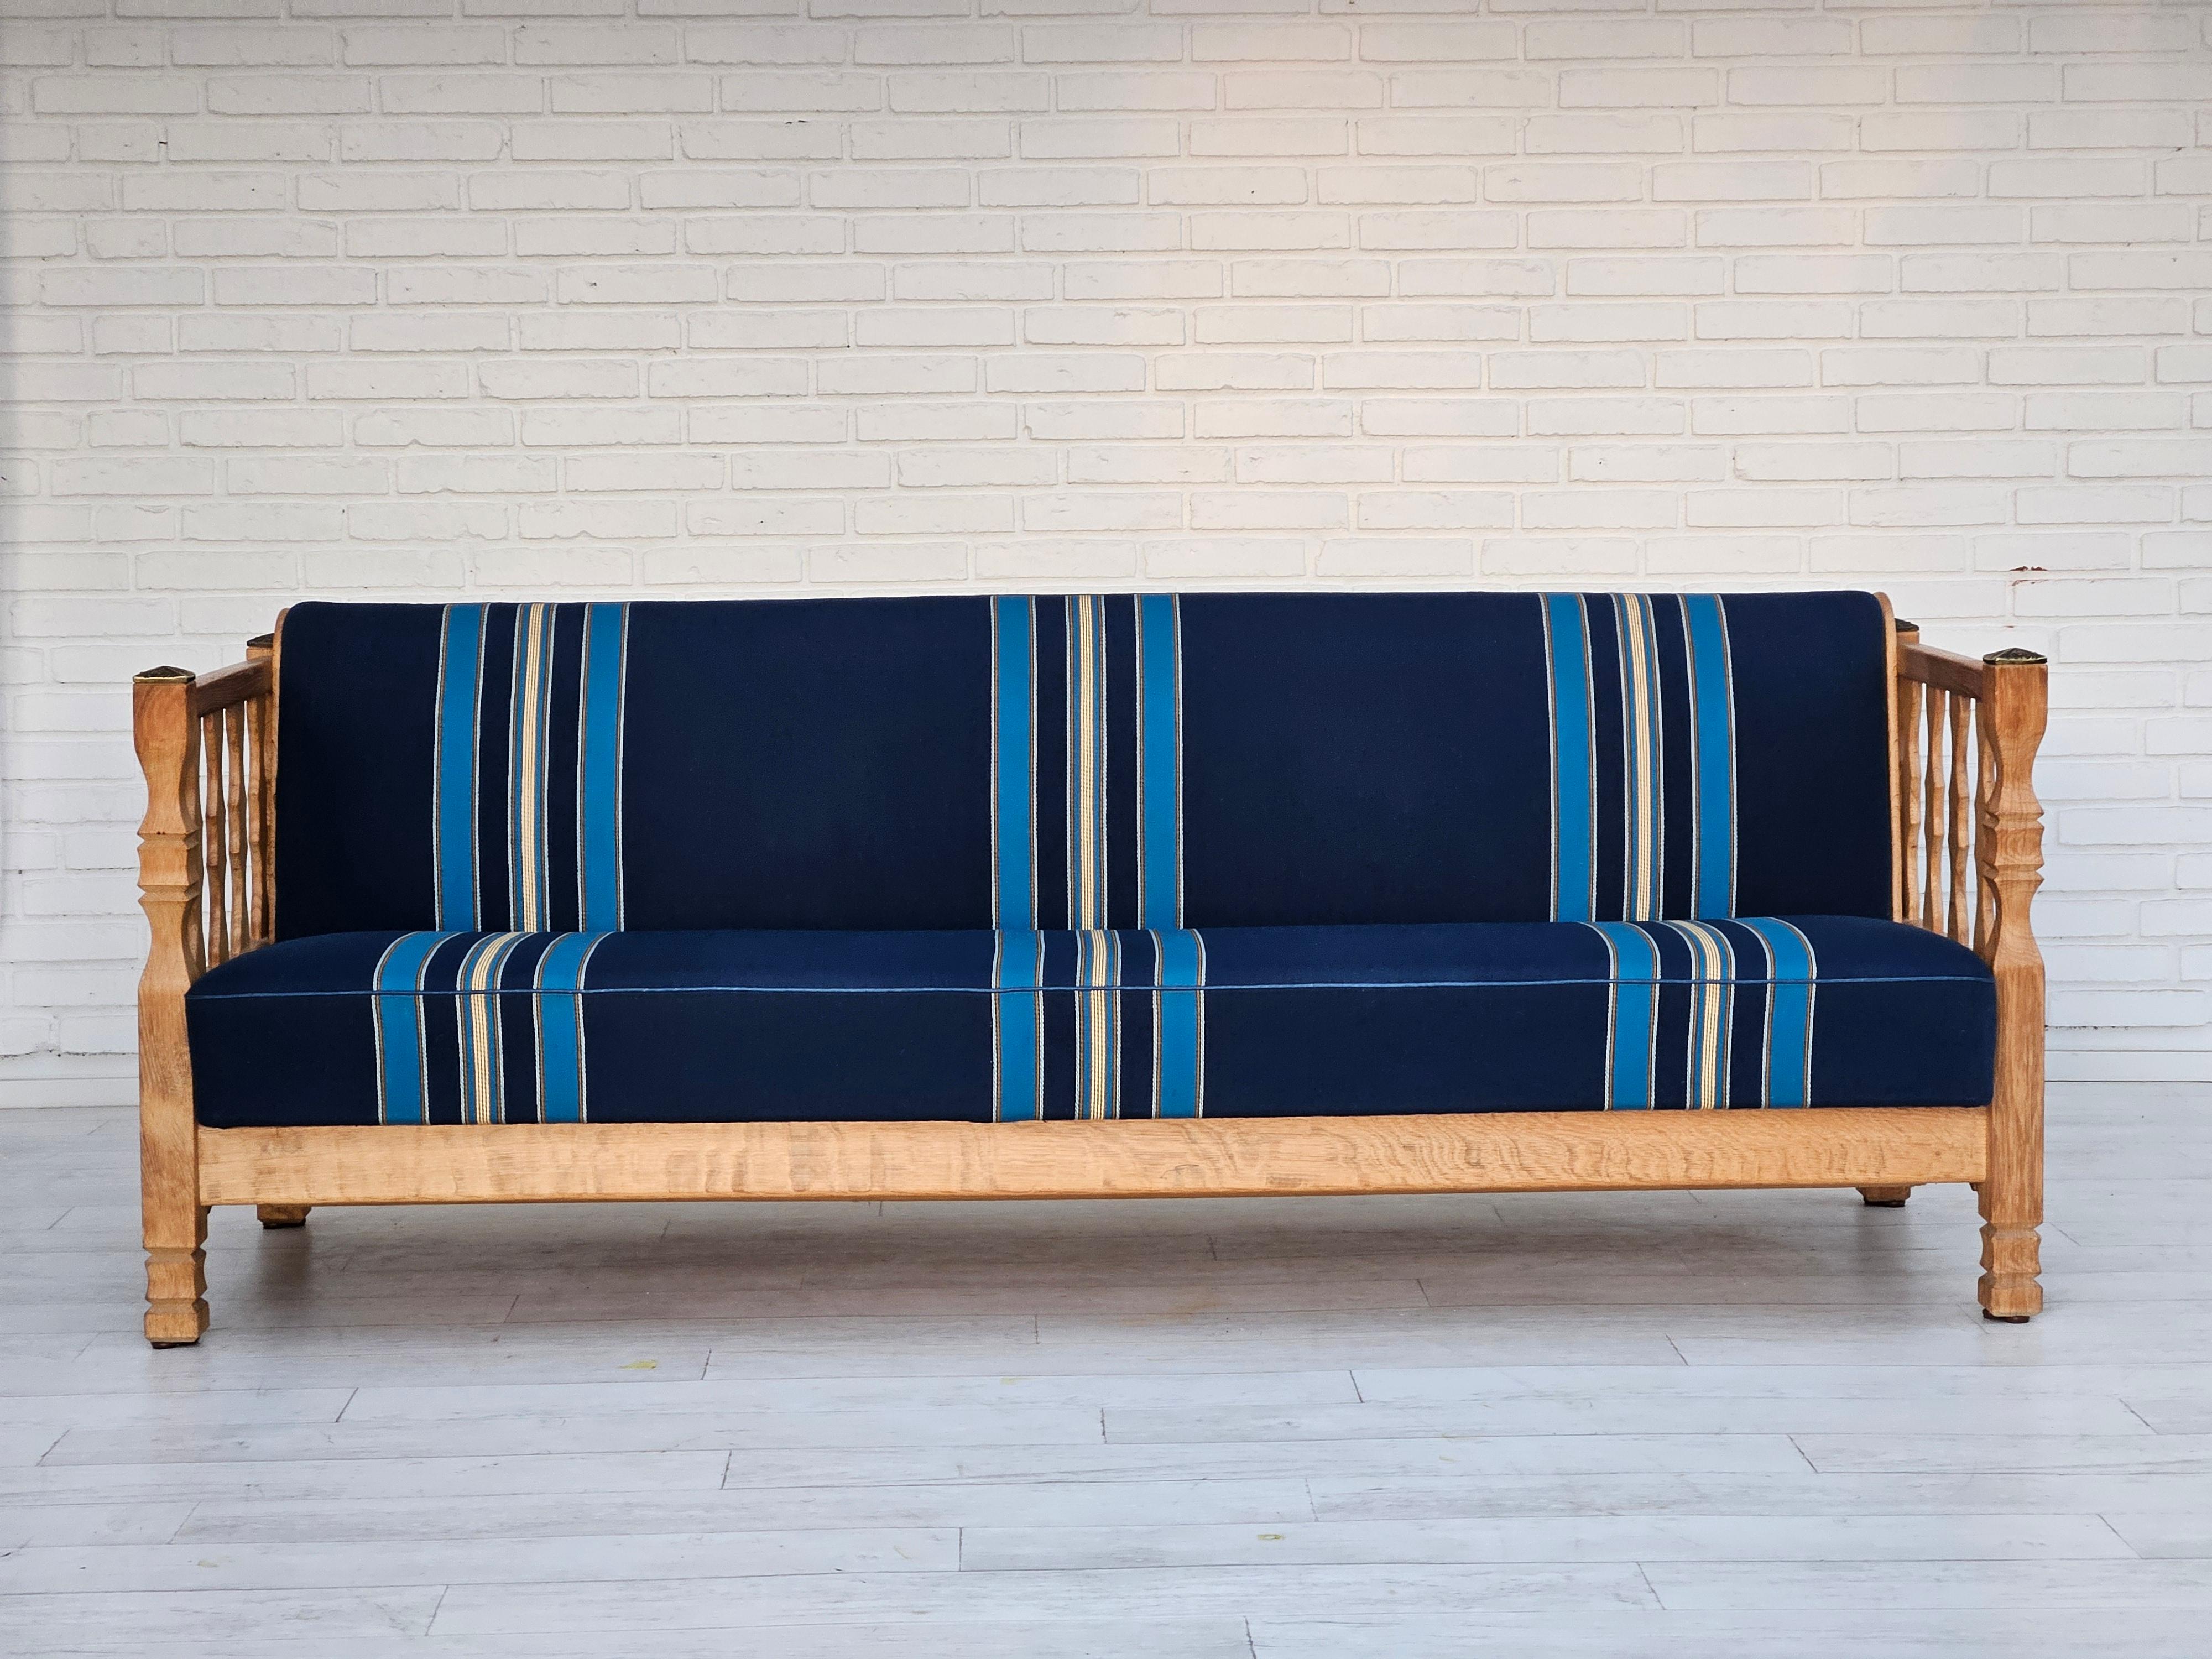 1970s, Danish sleeping foldable sofa. Original very good condition: no smells and no stains. Furniture wool fabric in blue color. Can be put in duvet, pillows, etc. Solid oak wood, springs in the seat and back. Manufactured by Danish furniture